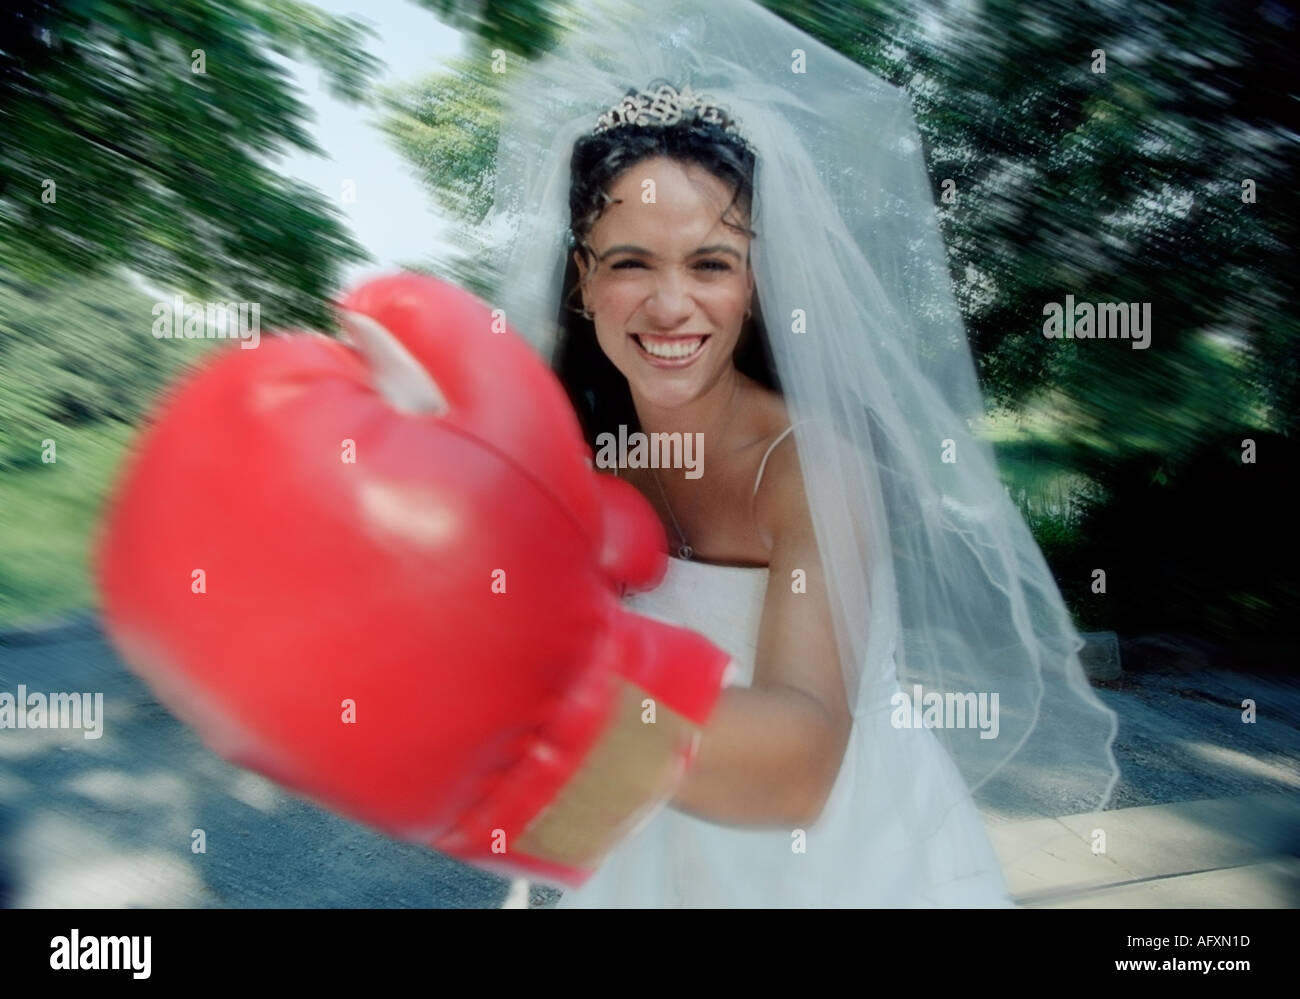 Bride play fighting in her wedding dress and veil wearing boxing gloves Stock Photo